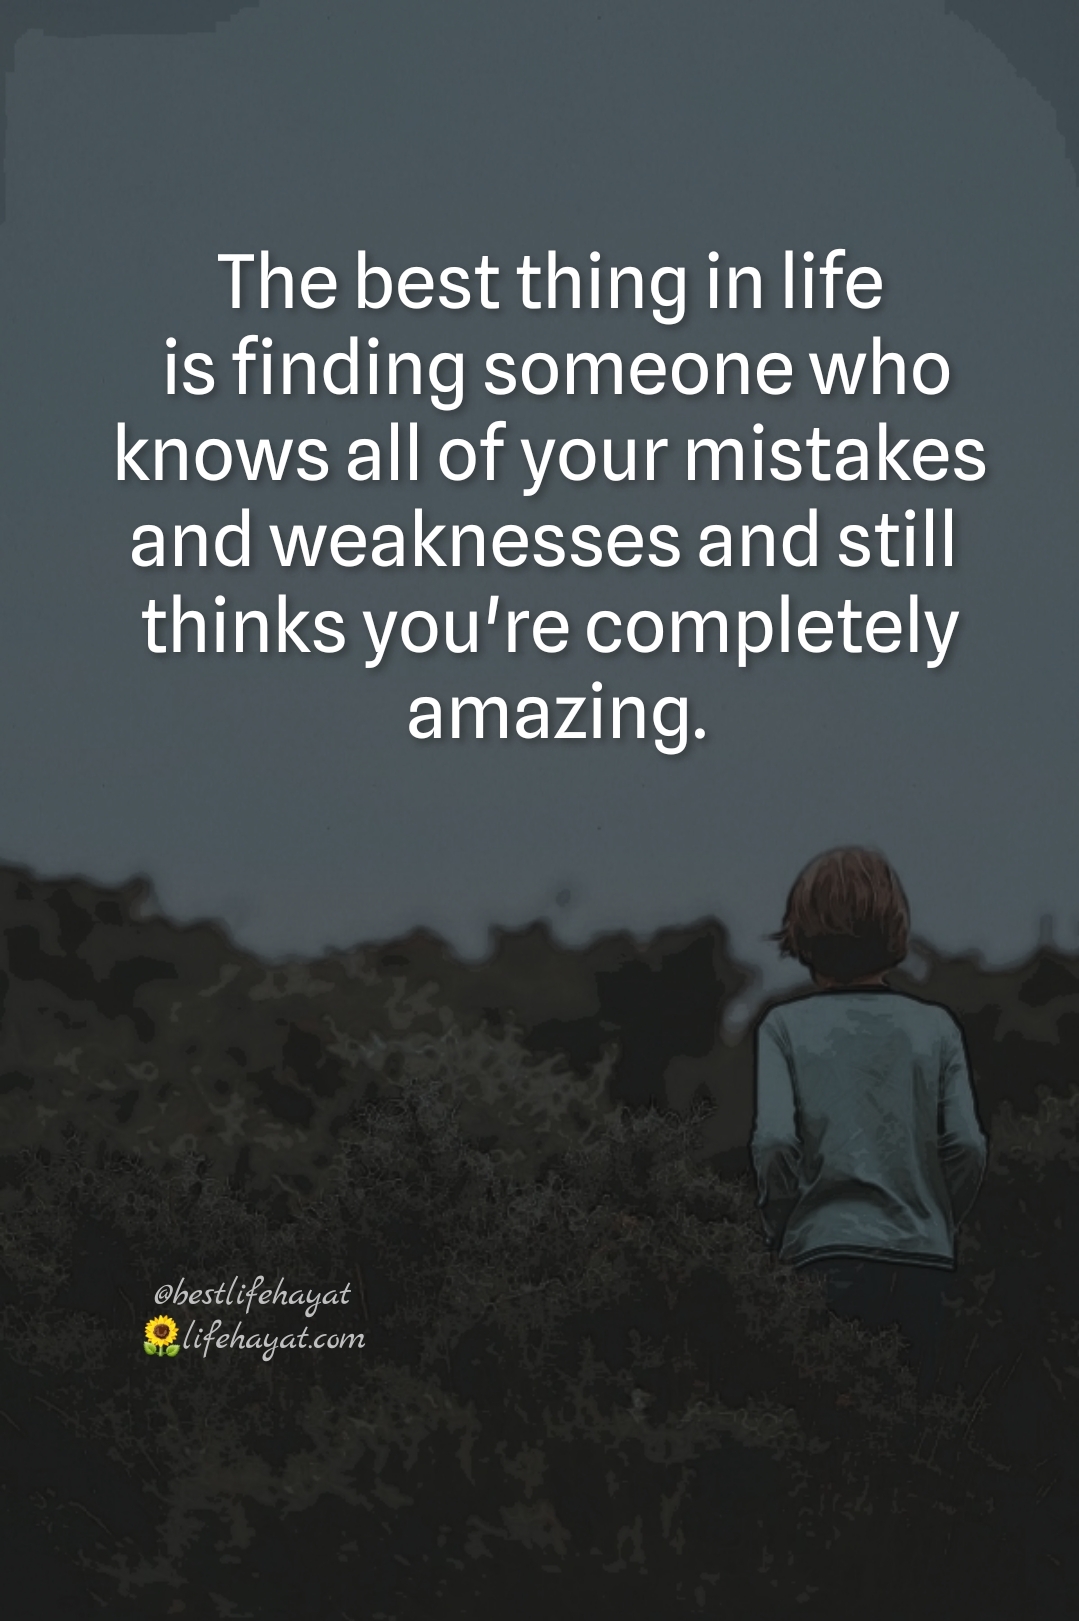 We Make Mistakes And Learn - 25 Motivational Life Quotes - Life Hayat